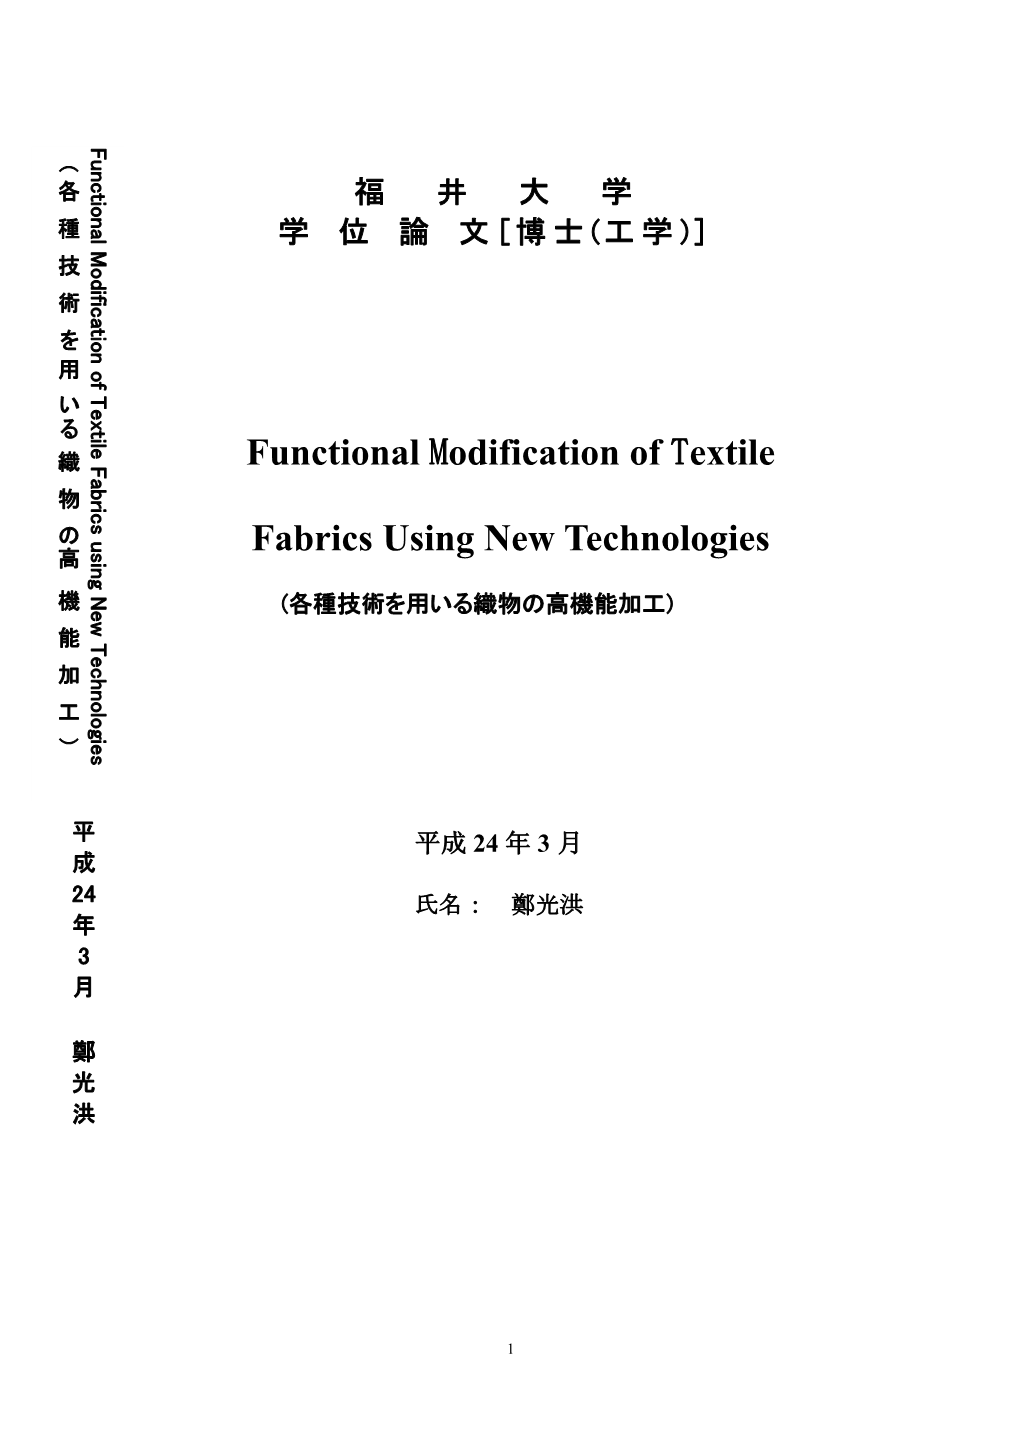 Functional Modification of Textile Fabrics Using New Technologies